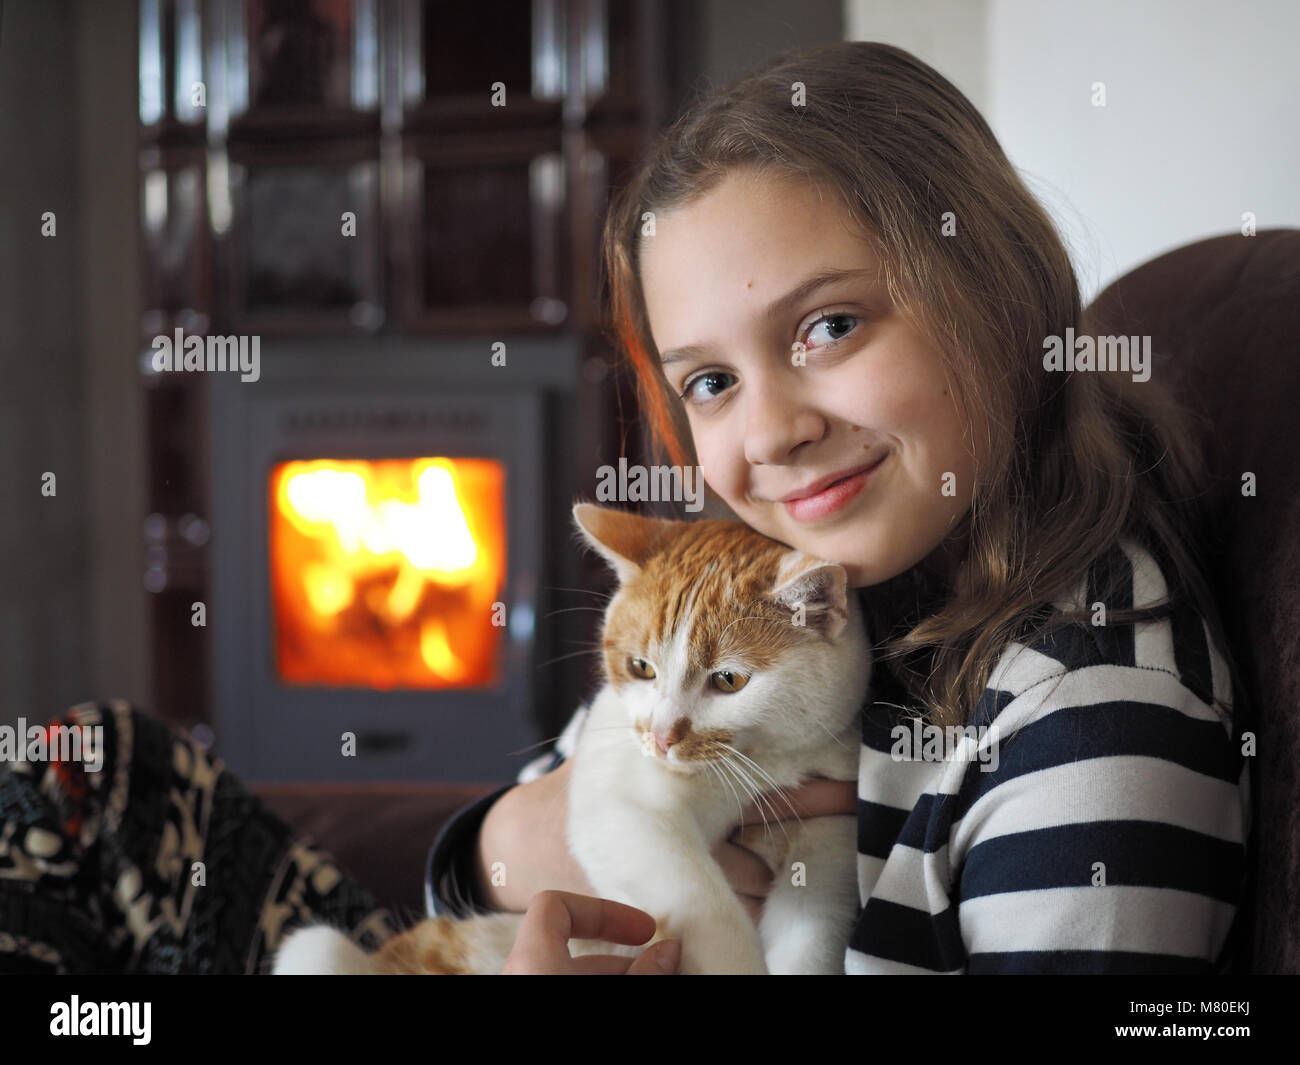 indoor shot young girl with cat Stock Photo